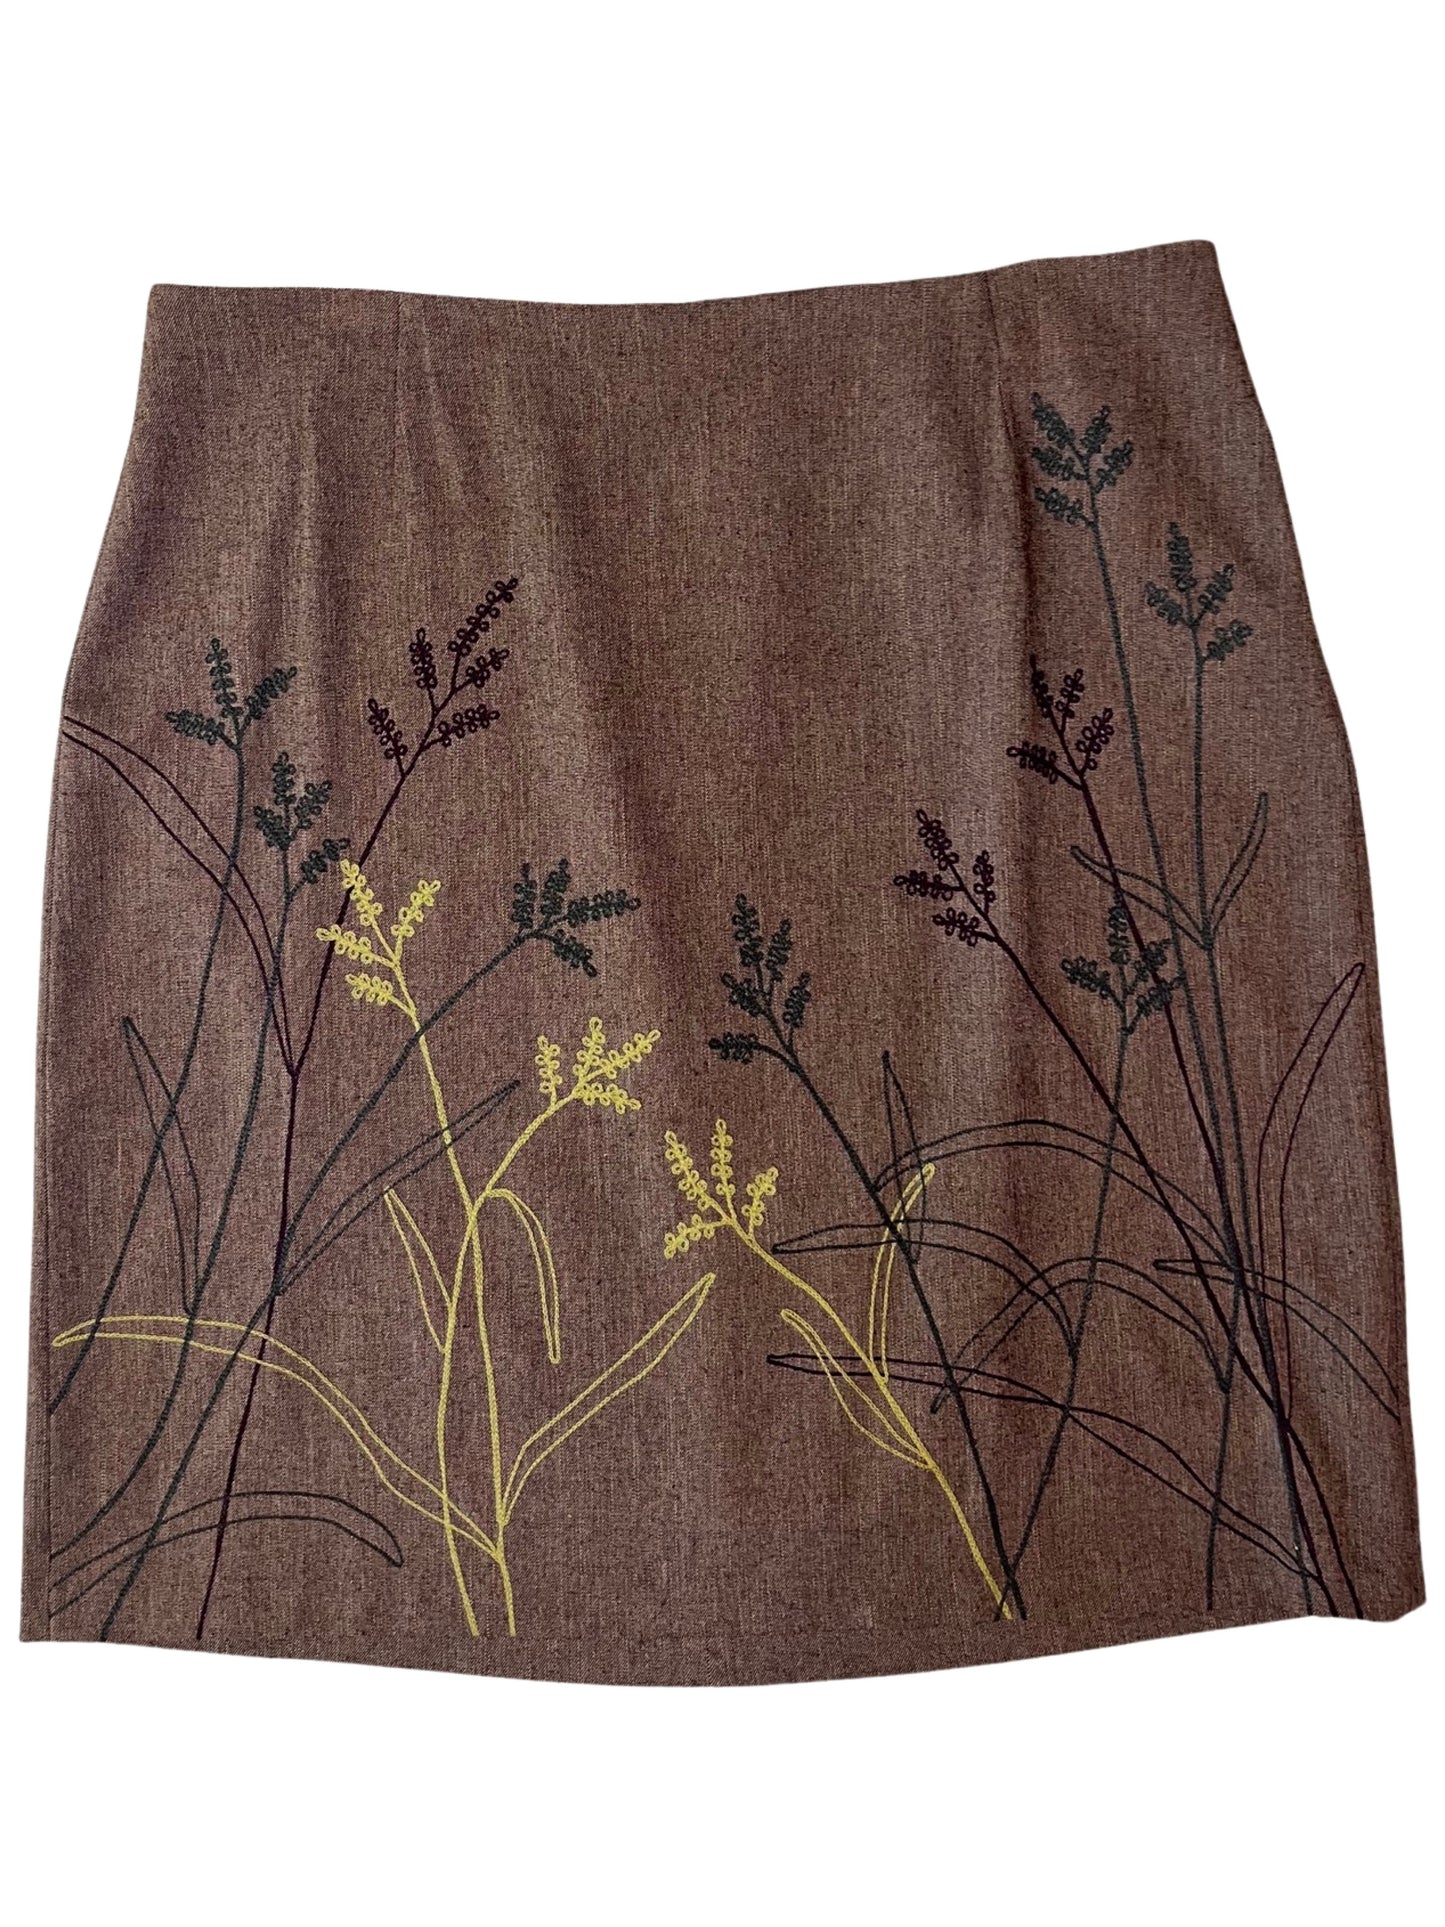 Brown Floral Embroidered Skirt